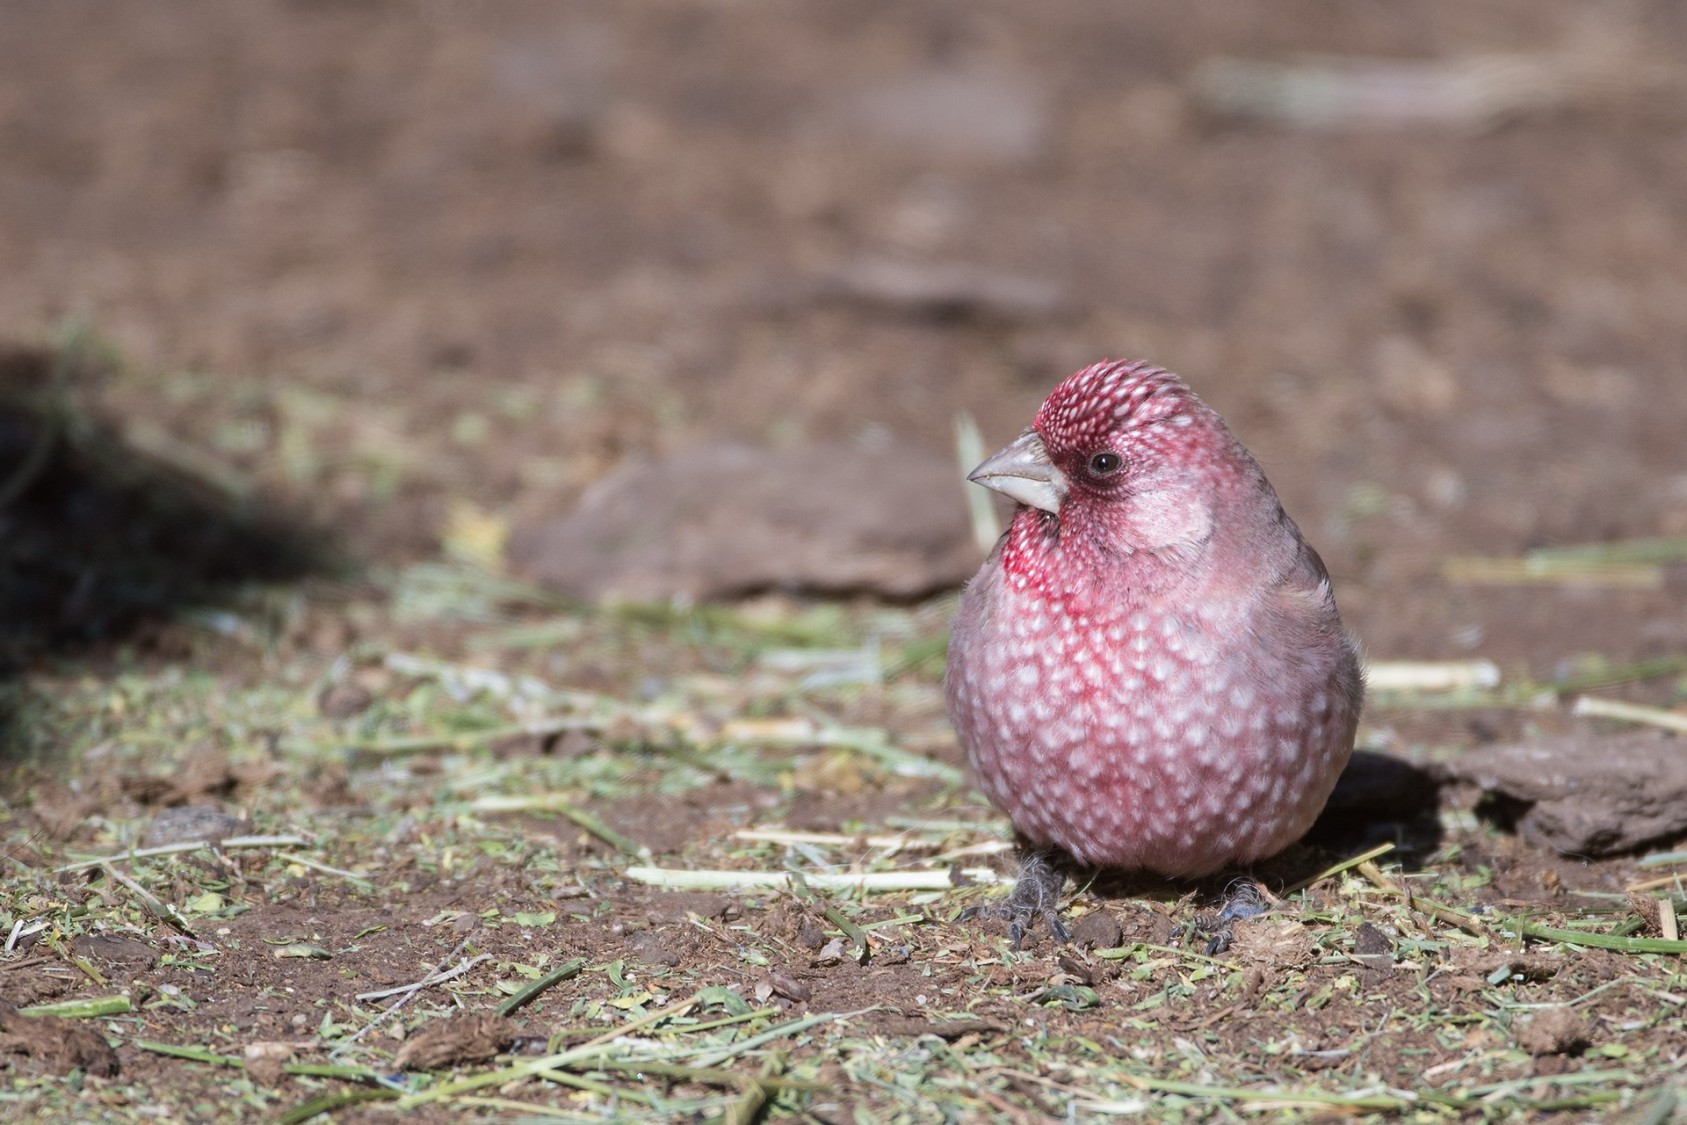 A Great Rosefinch (Carpodacus rubicilla) foraged inside a sheep pen, possibly looking for seeds amid the grass.